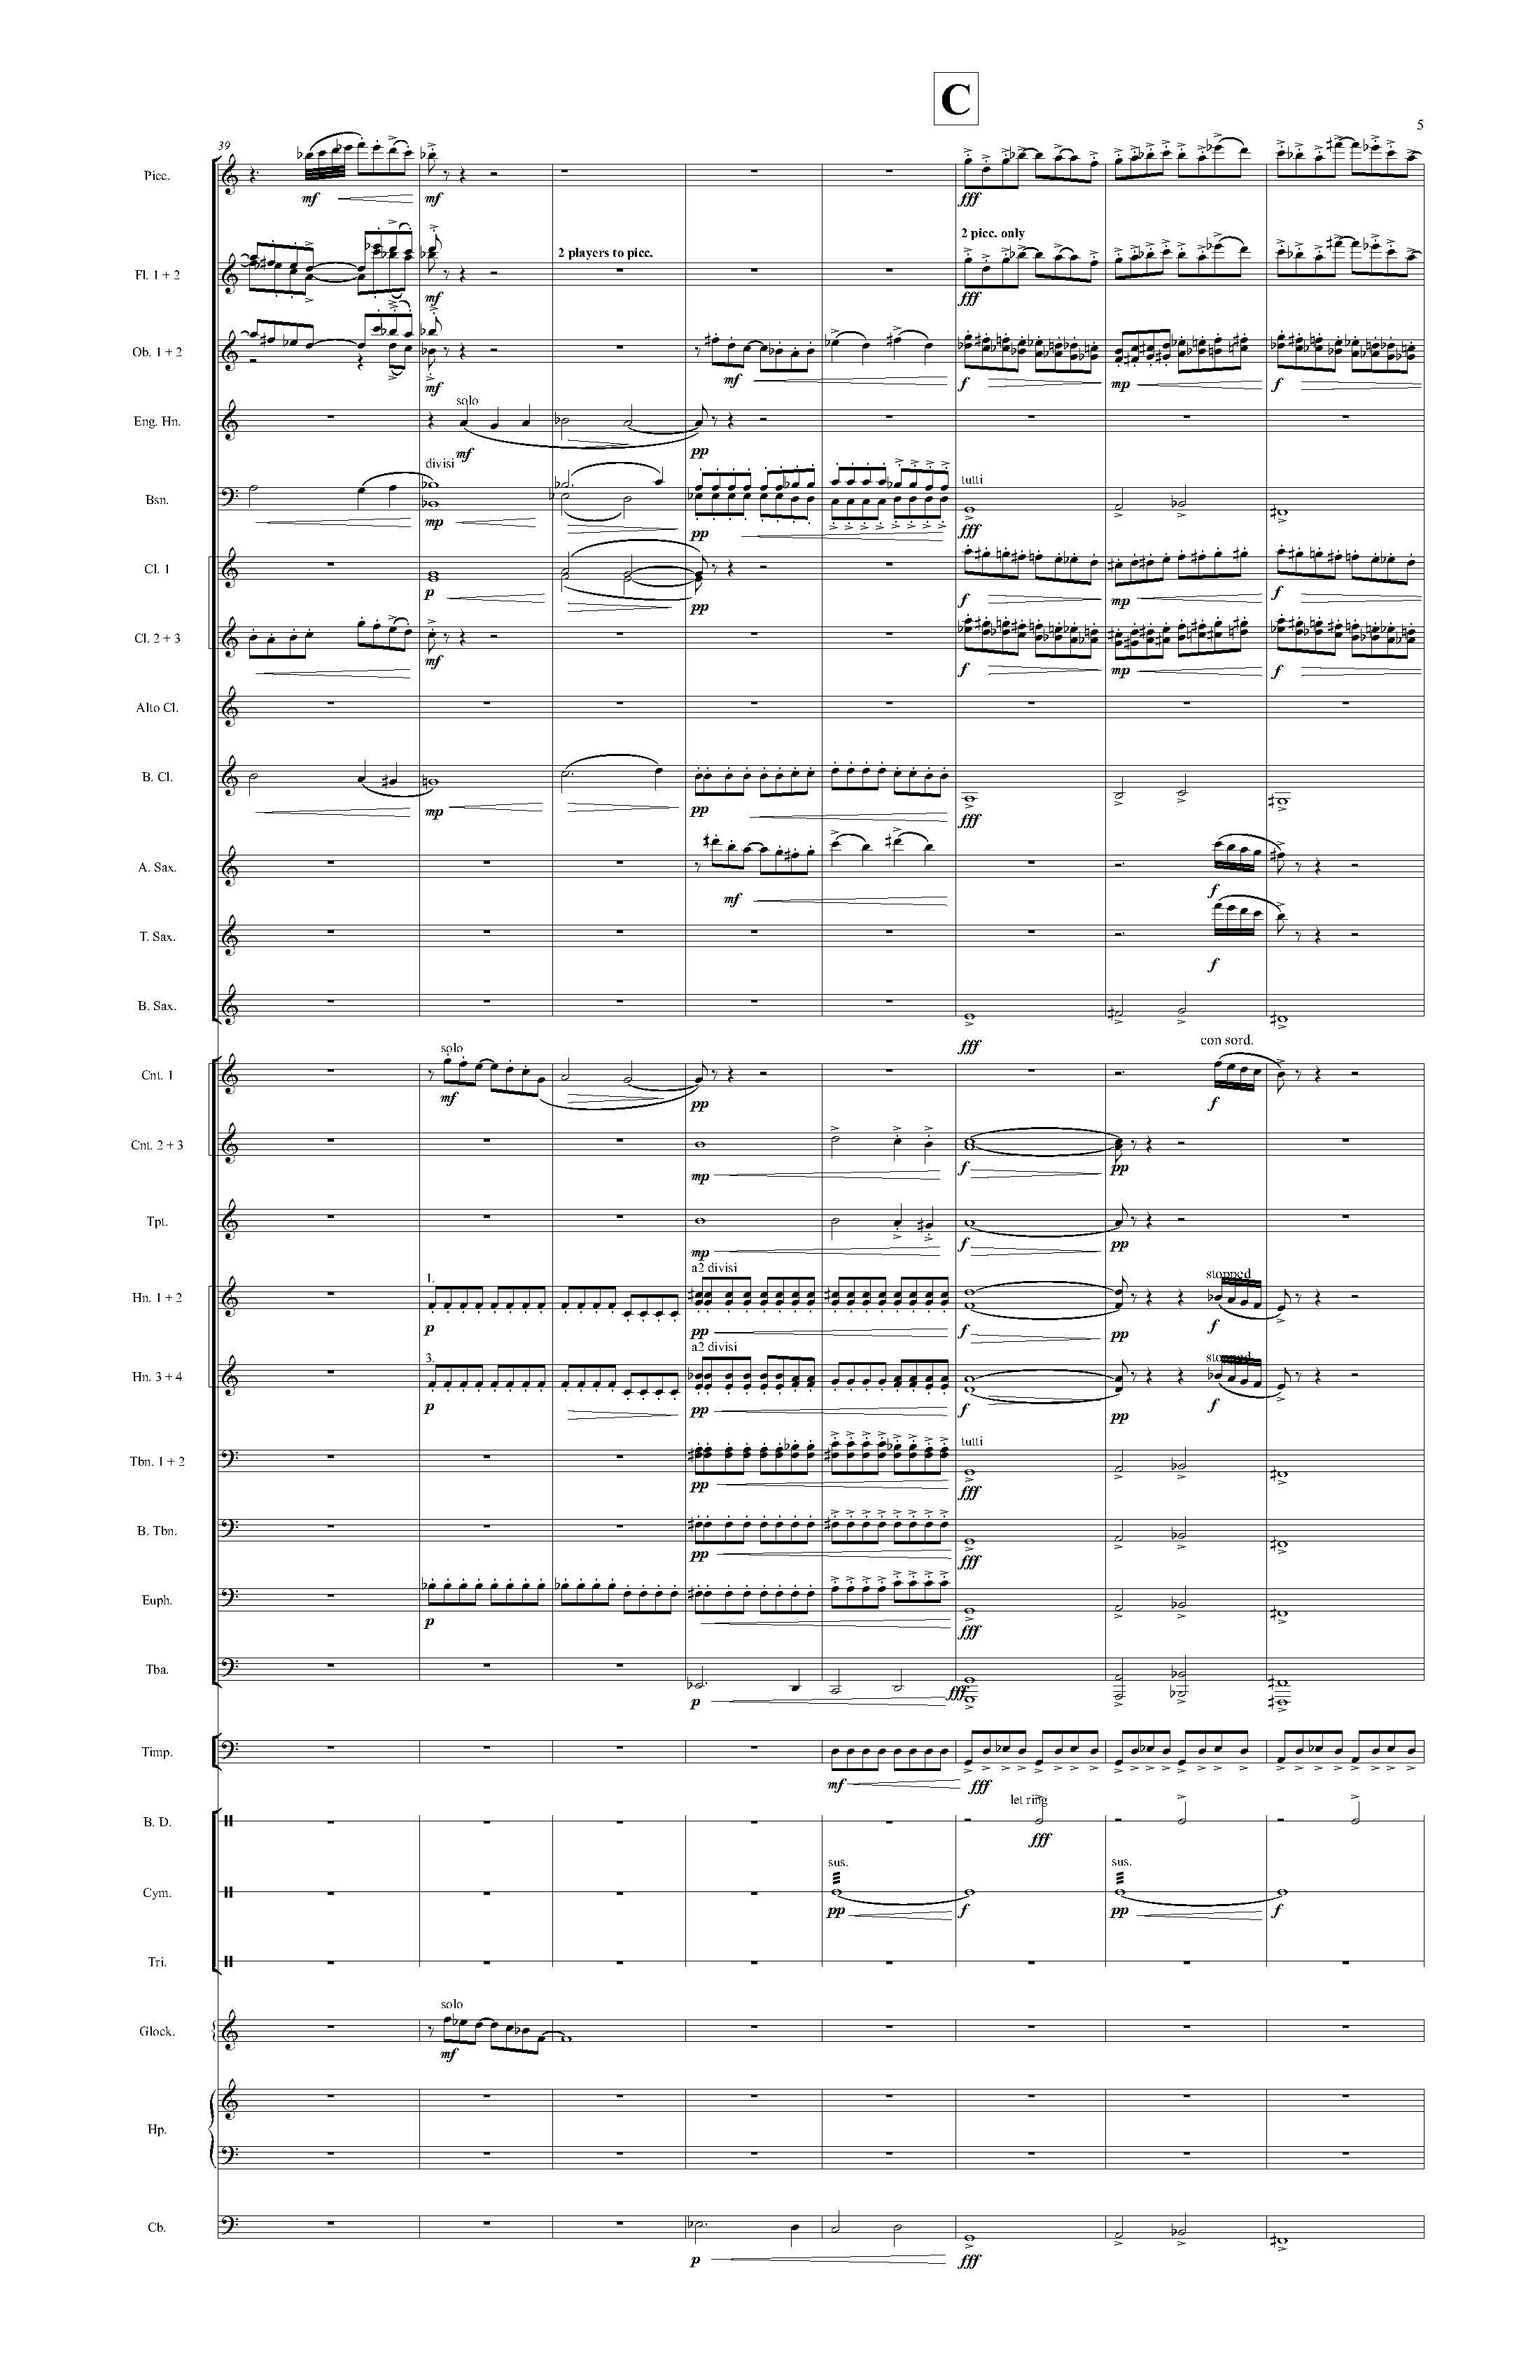 Psyche - Complete Score_Page_11.jpg